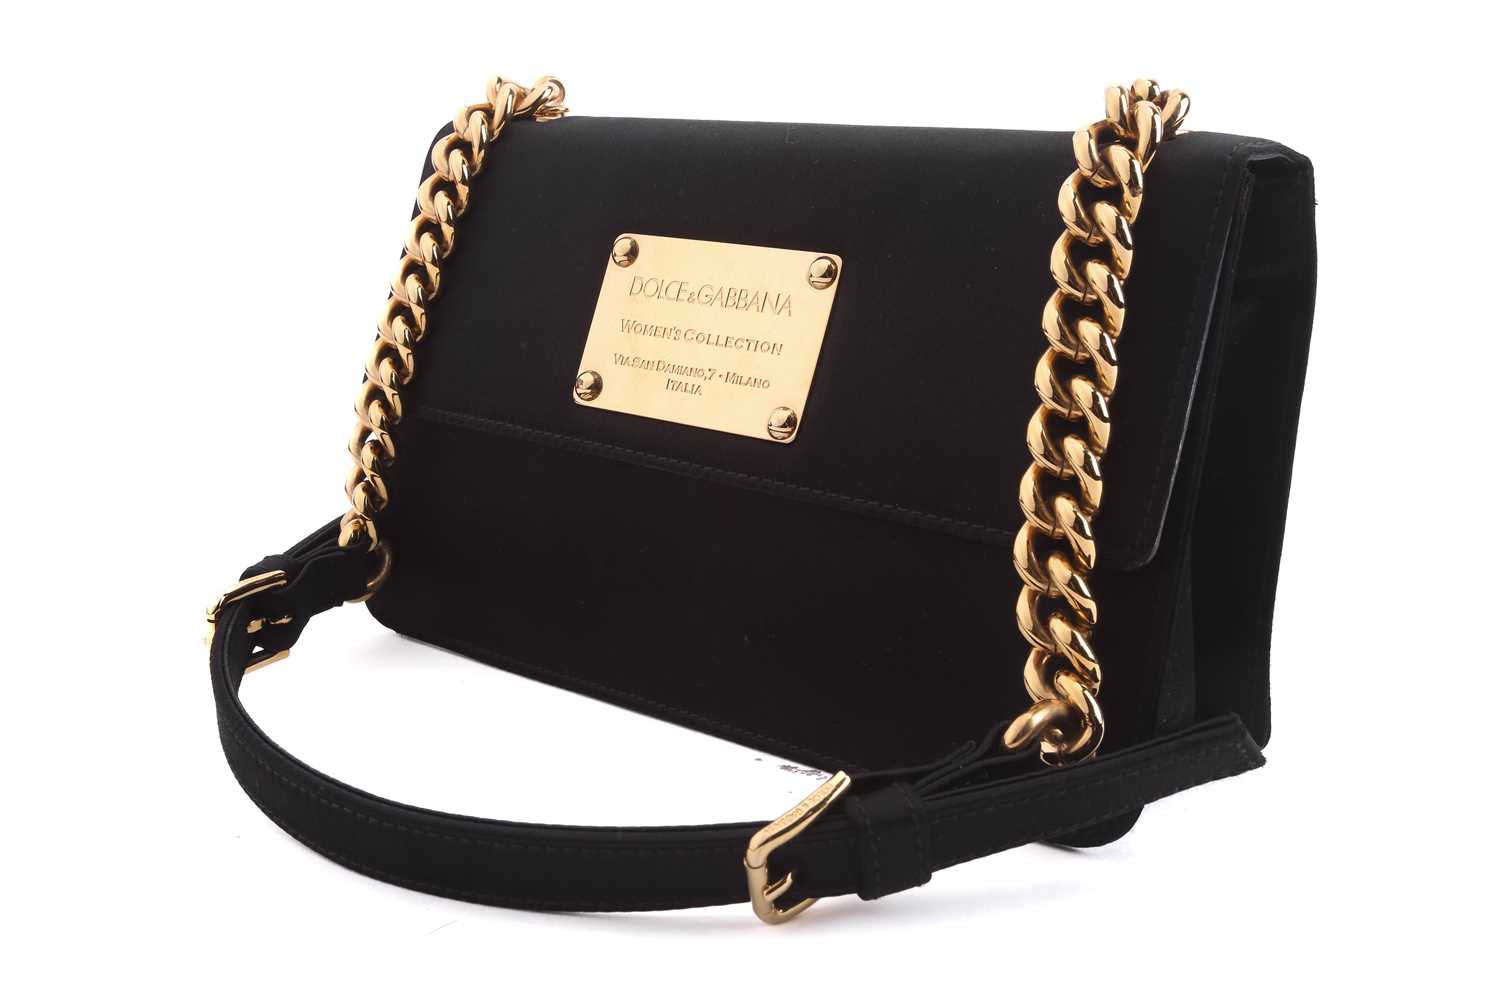 Dolce & Gabbana - 'Miss Belle' shoulder flap bag in black satin, with leather trims and pink satin - Image 2 of 8